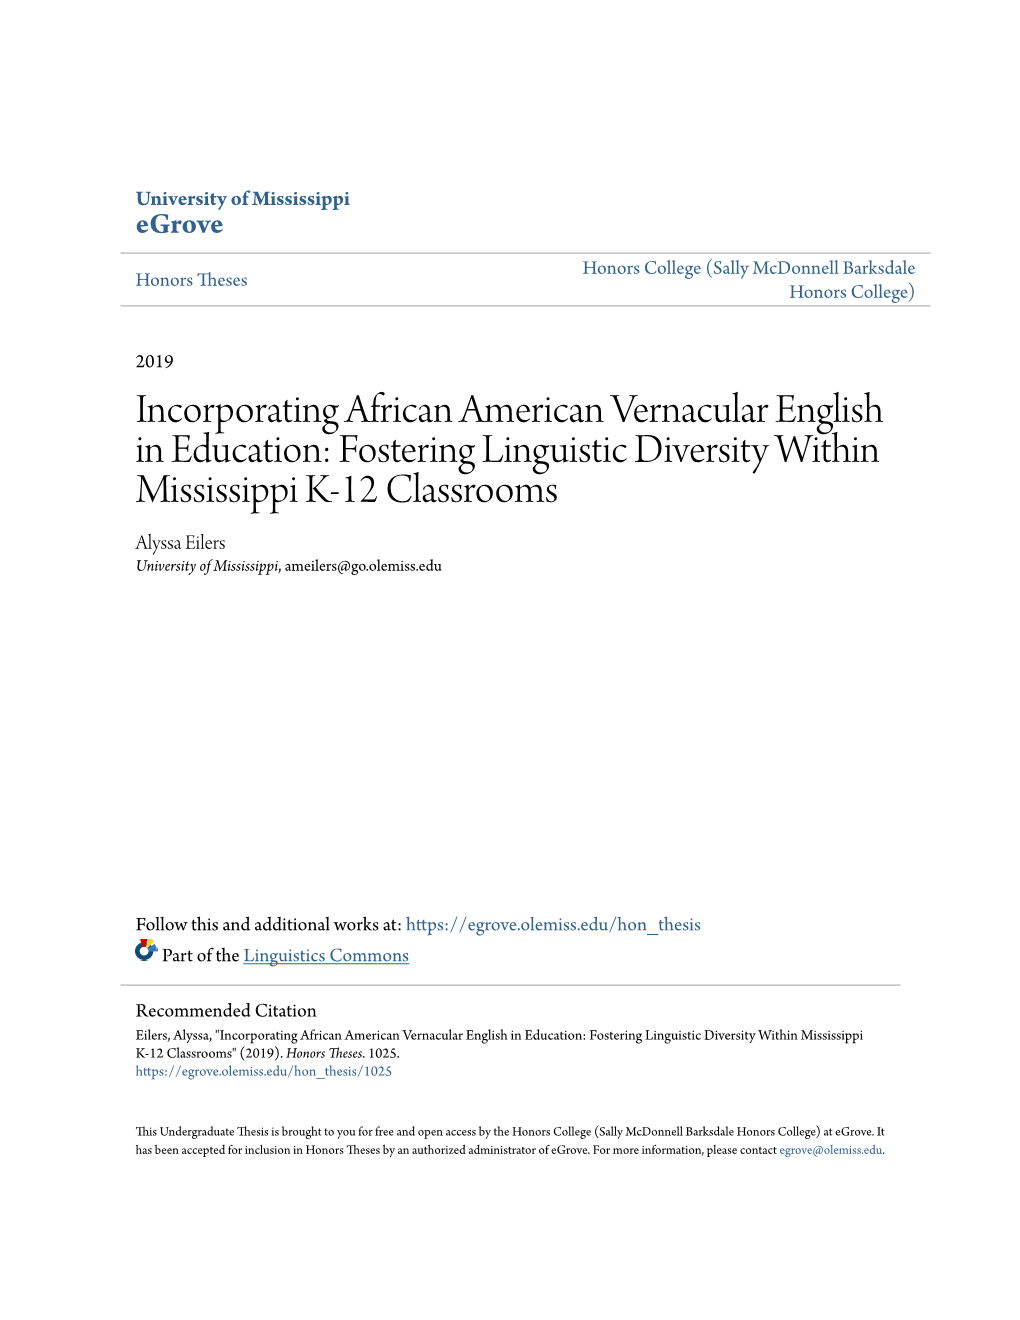 Incorporating African American Vernacular English In